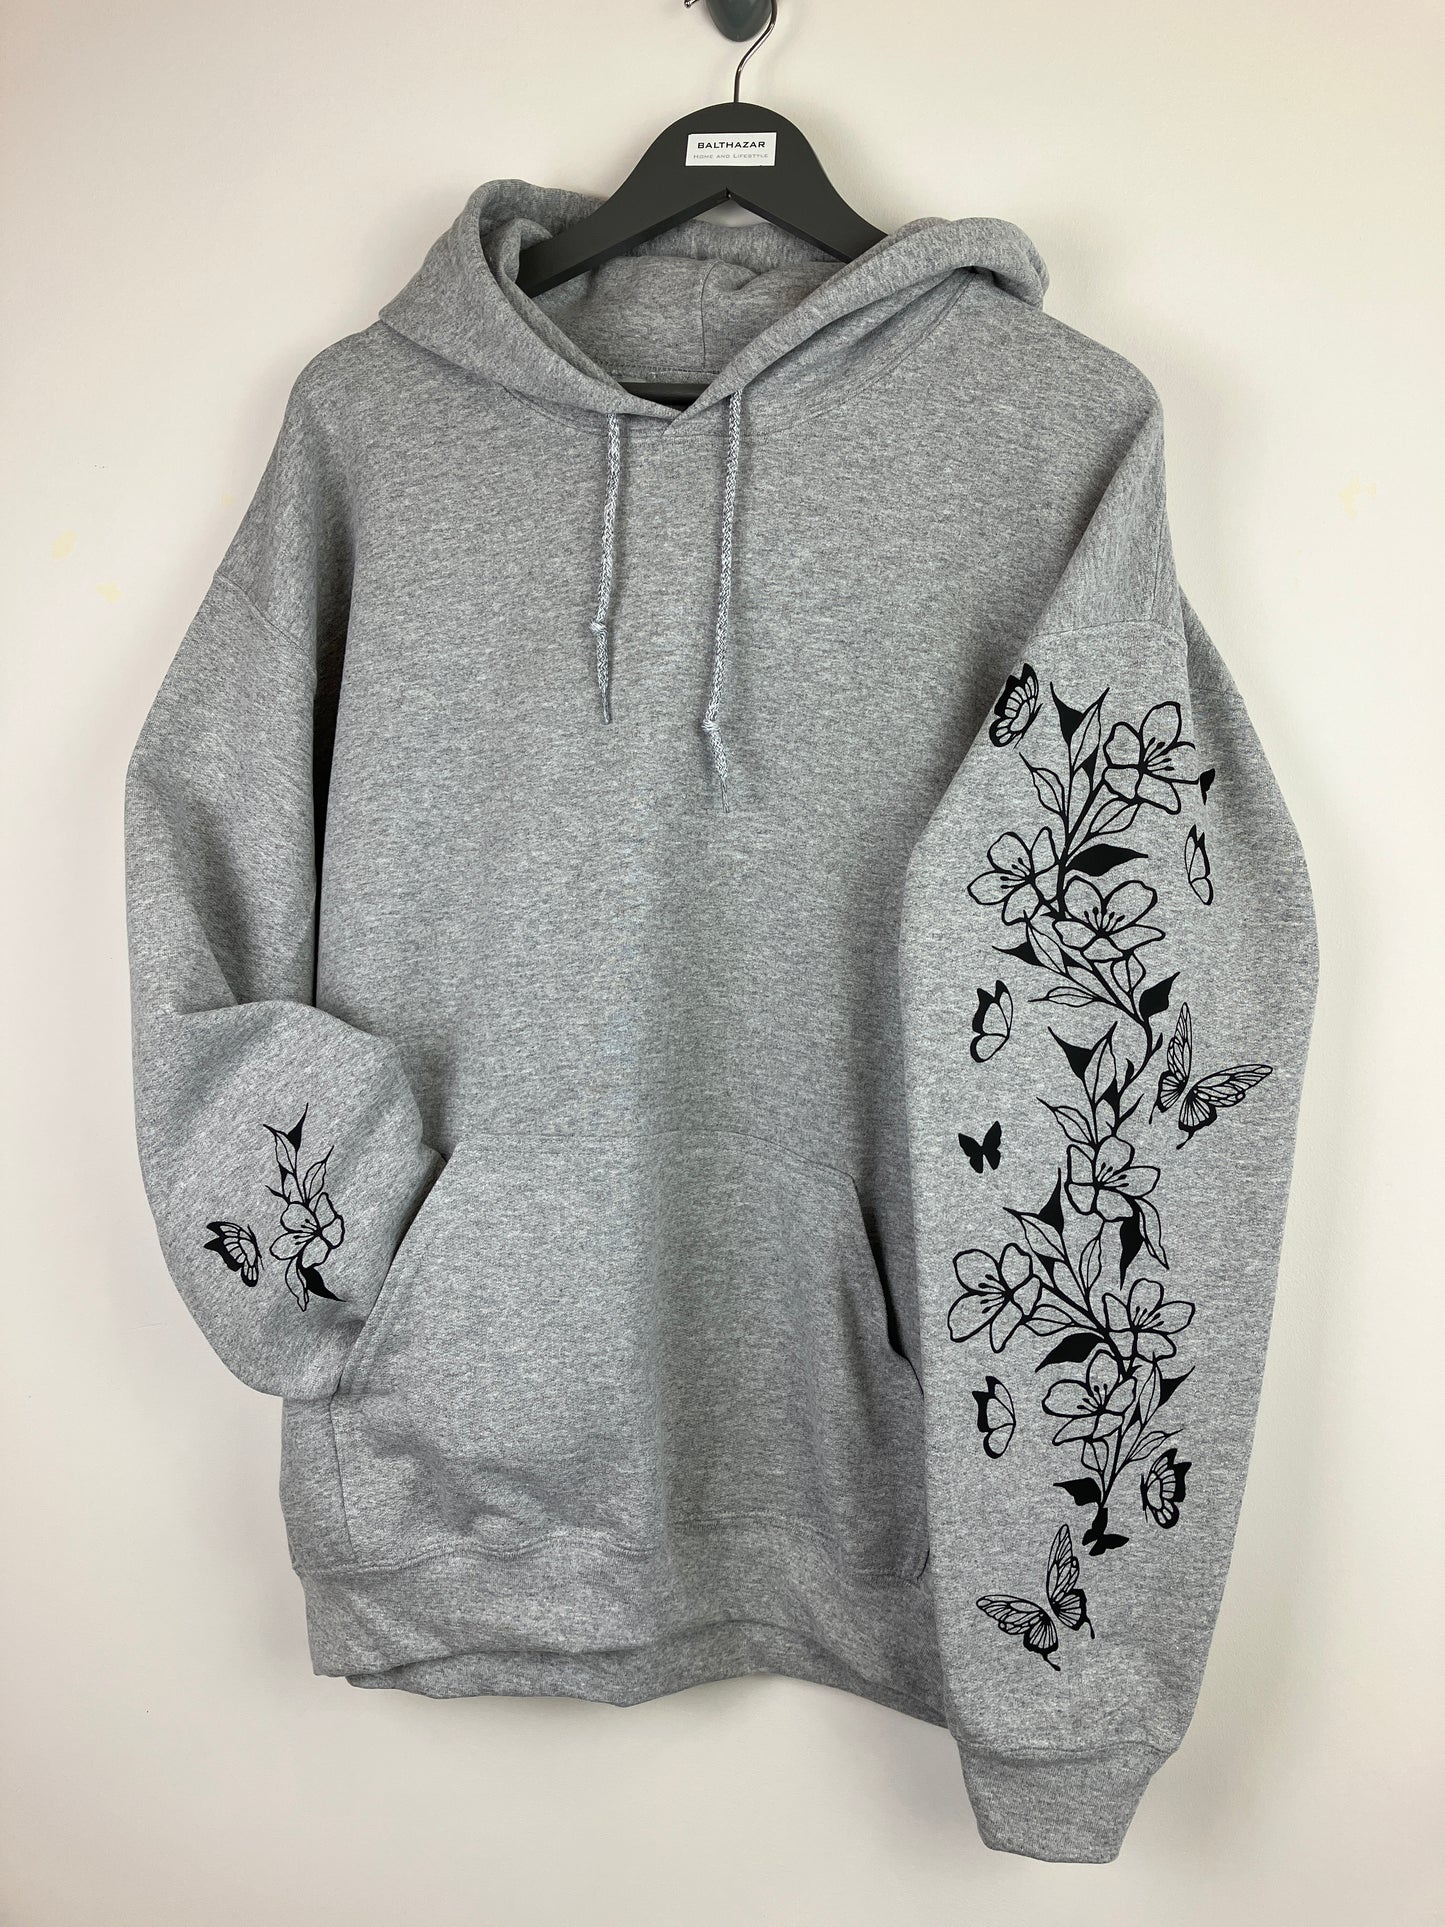 Floral butterfly sleeved hoody - tattoo style